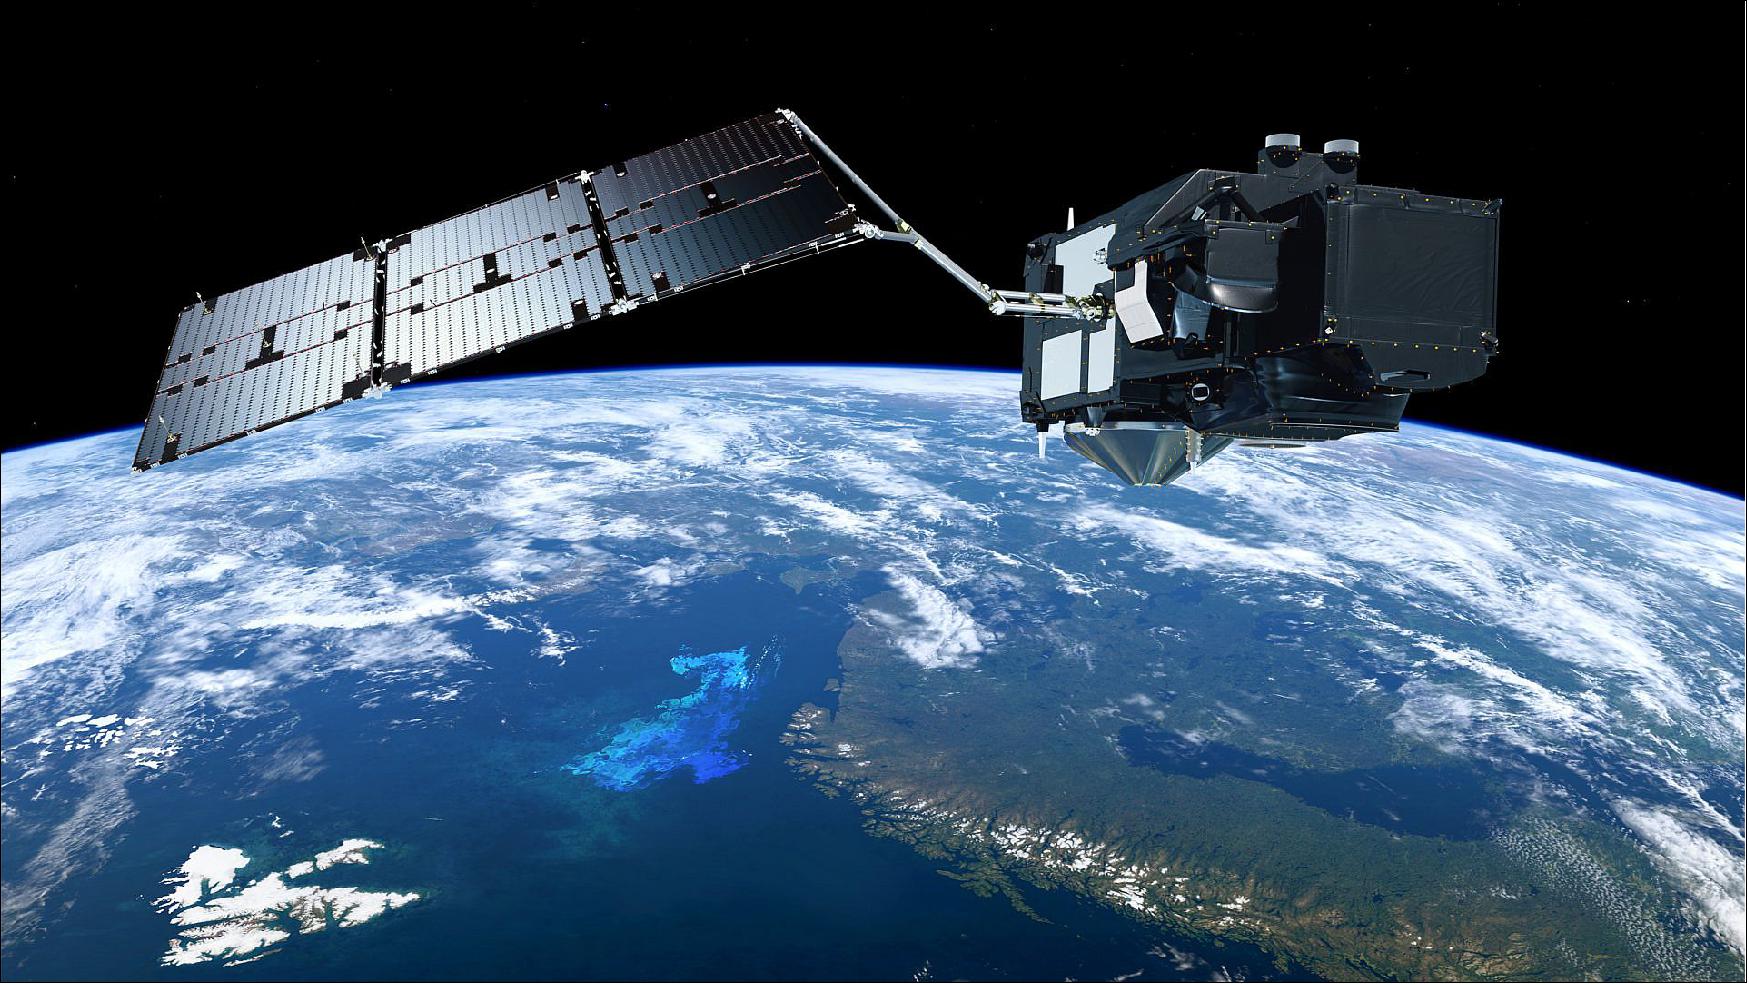 Figure 1: Artist's rendition of the deployed Sentinel-3 spacecraft (image credit: ESA/ATG medialab) 16)